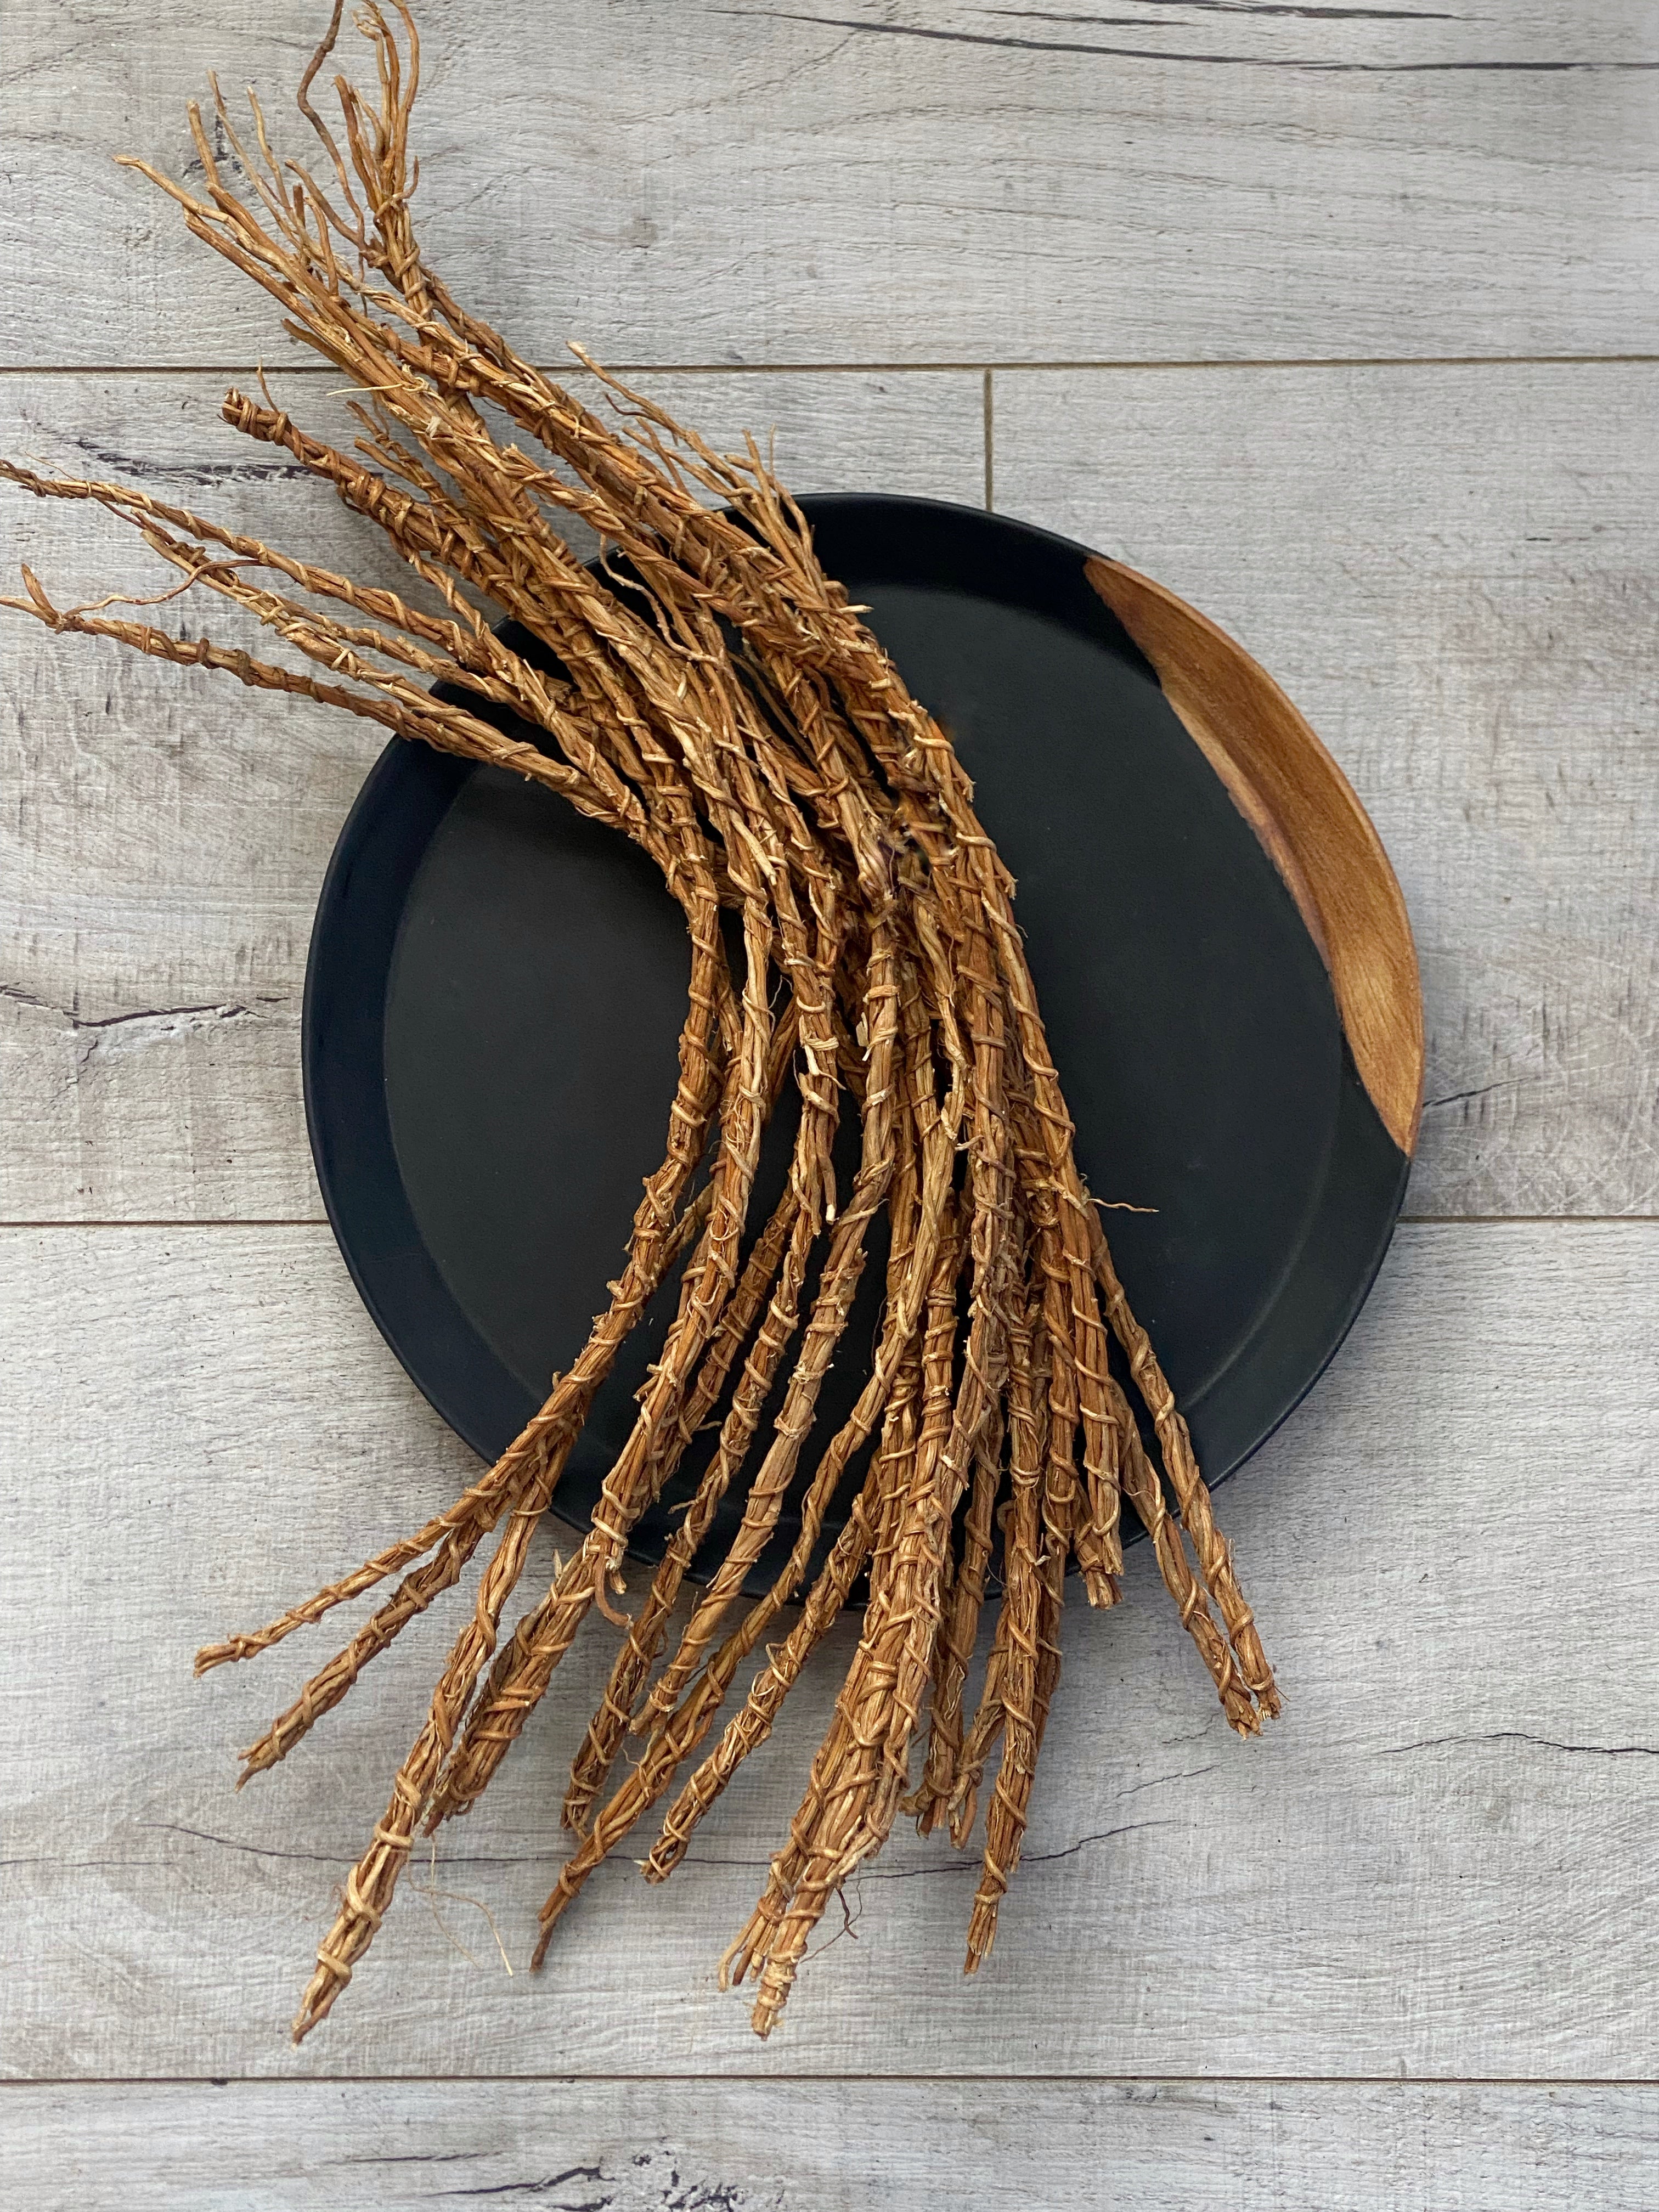 Braided Vetiver Root - Witching Roots